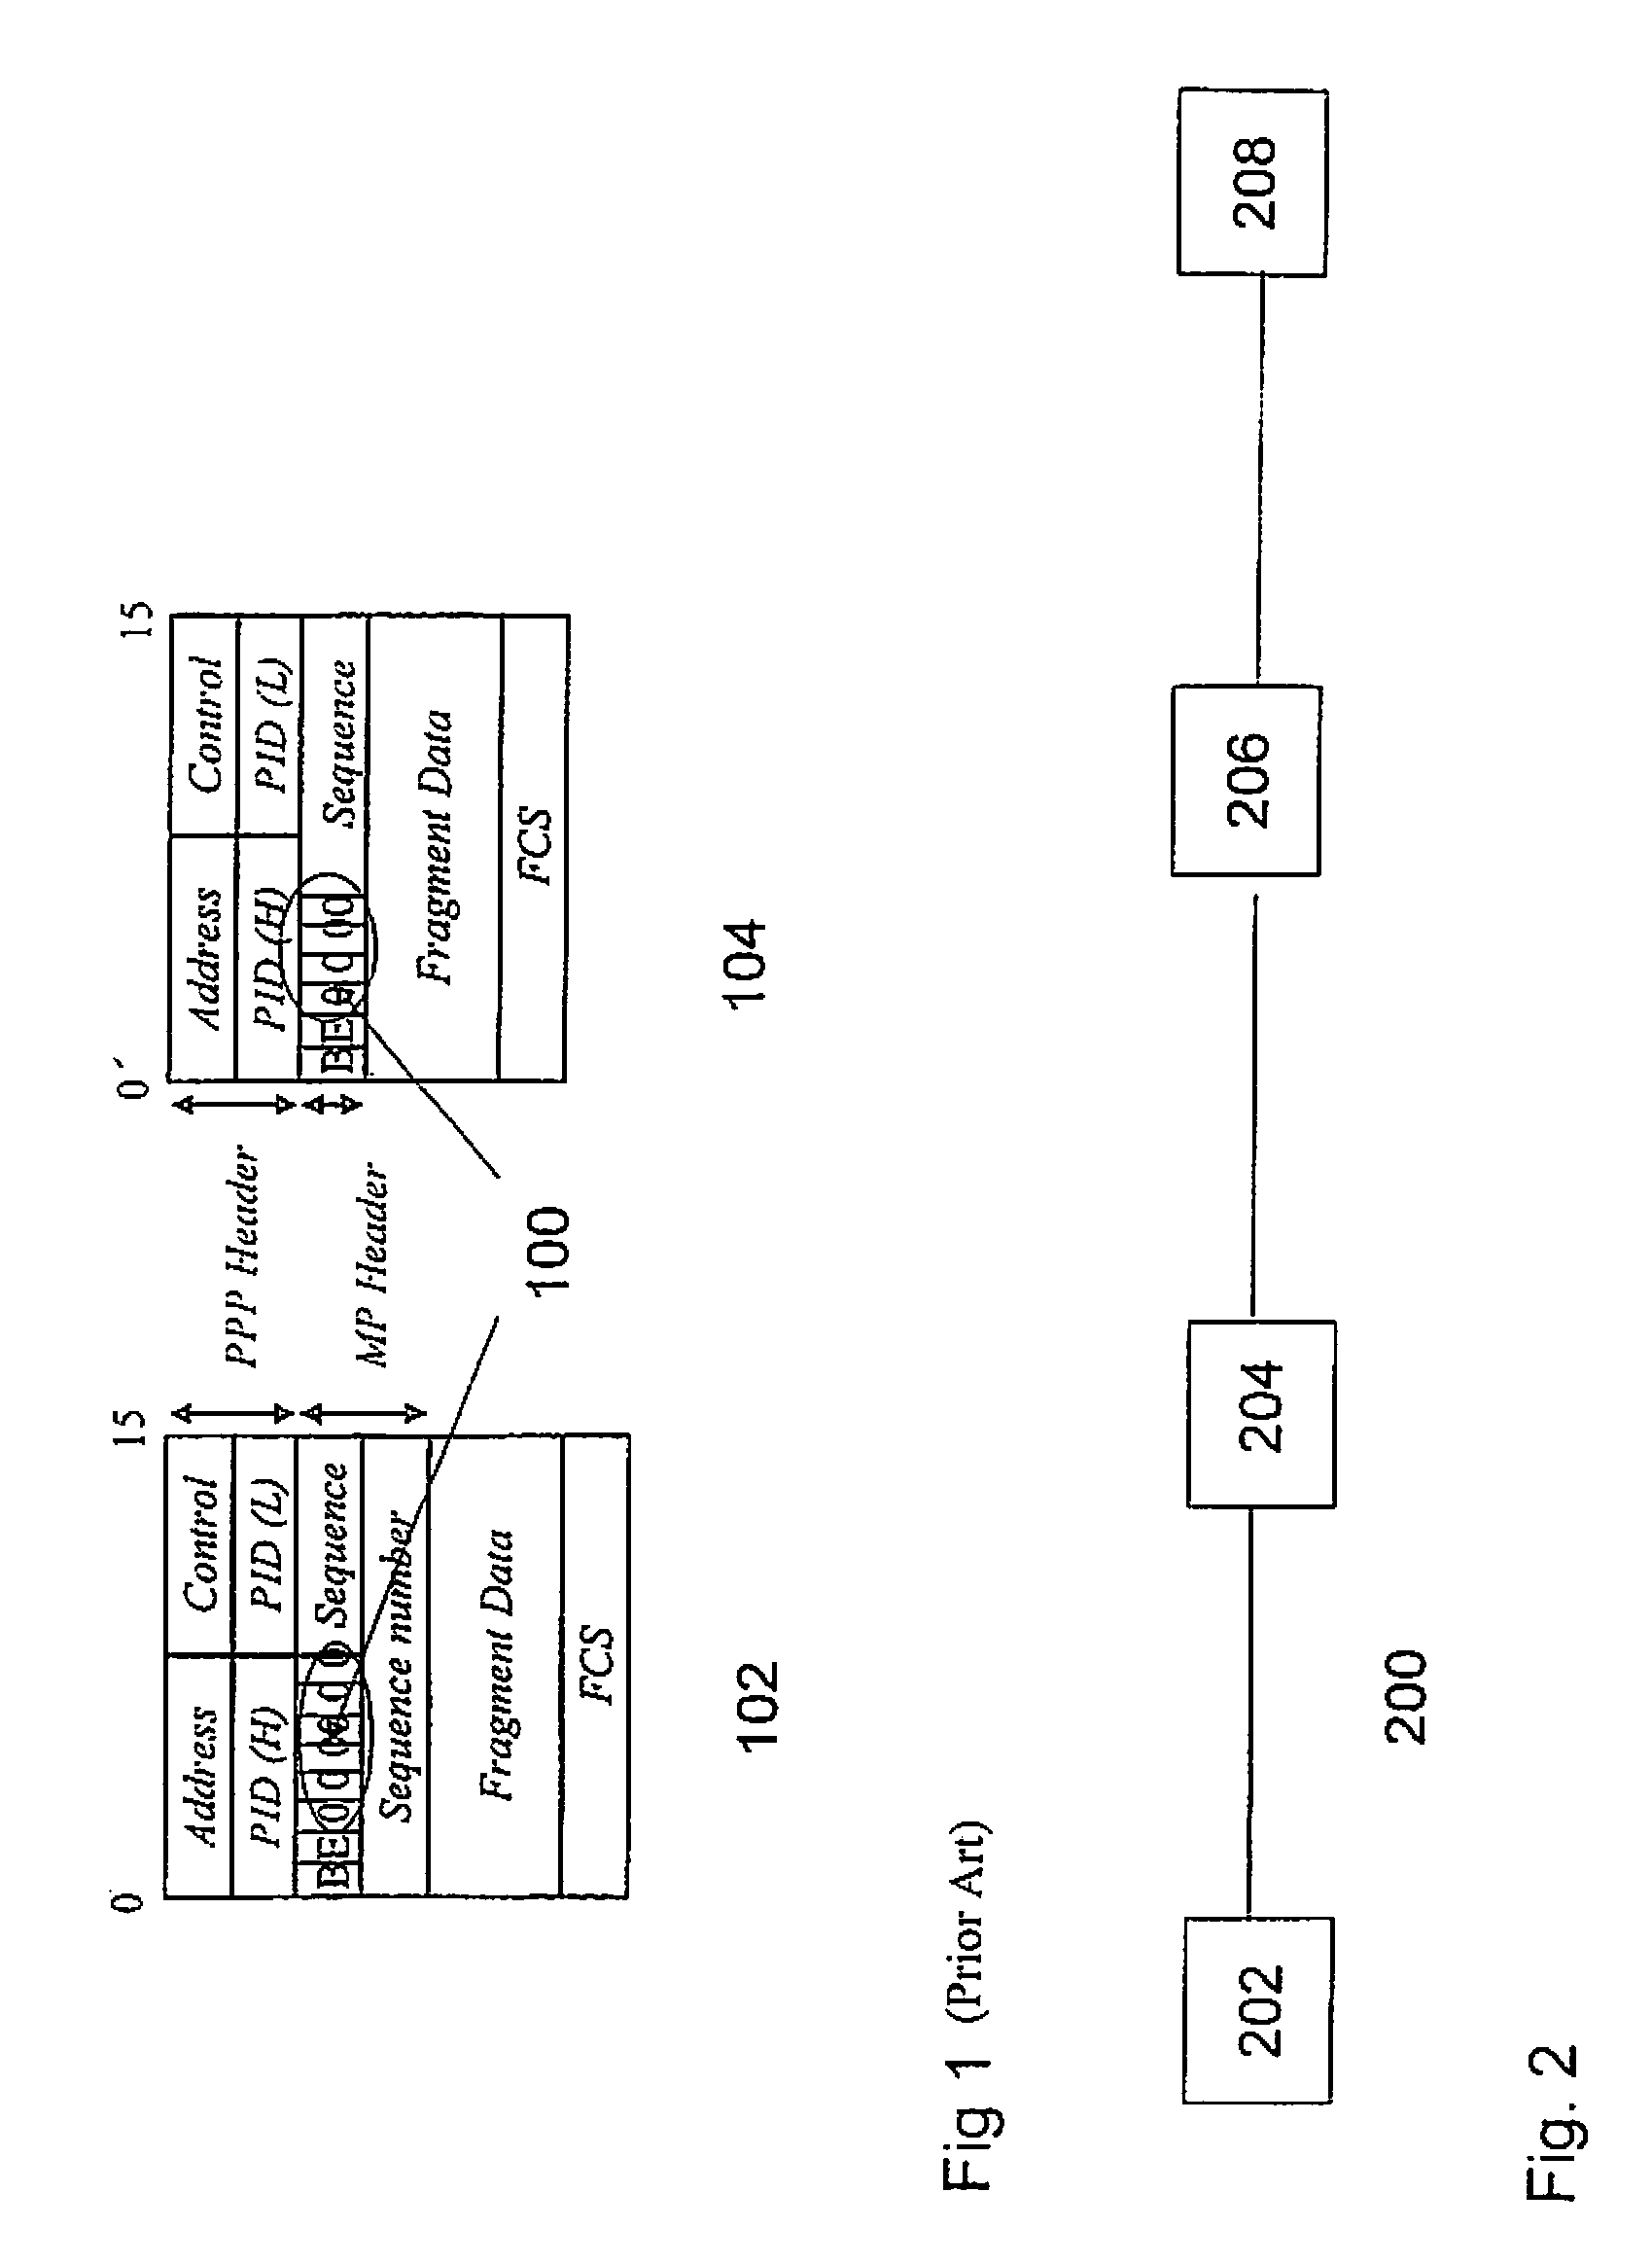 Reducing transmission time for data packets controlled by a link layer protocol comprising a fragmenting/defragmenting capability